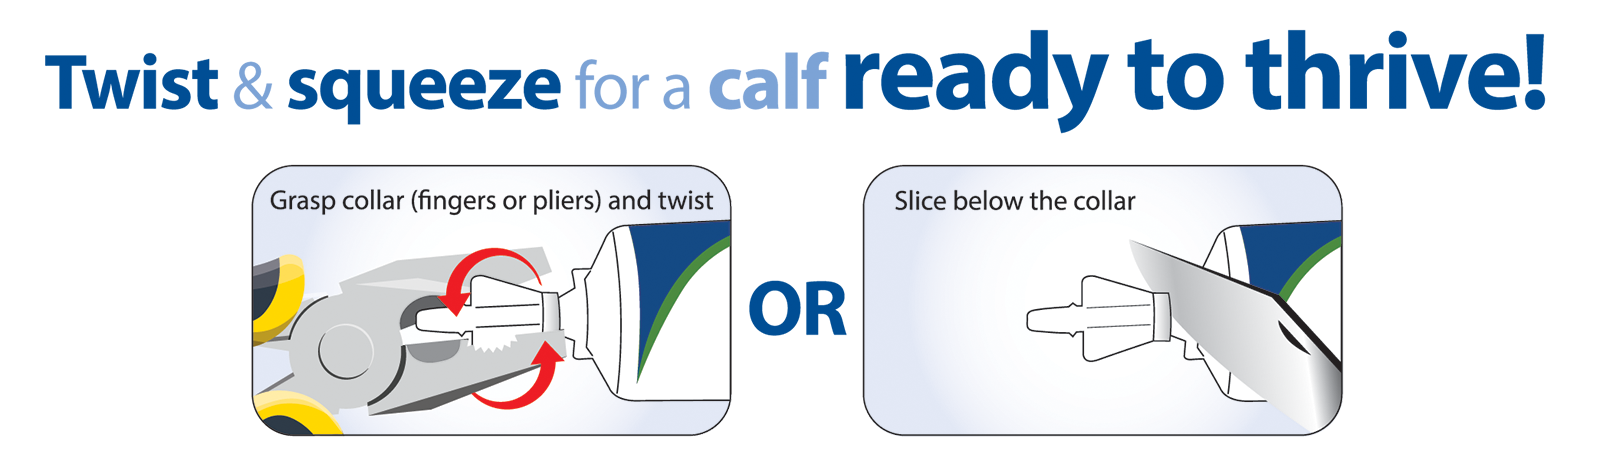 Graphic directions for how to open a Calf Perk Tube. Grasp the collar of the tube with fingers or pliers and twist the top off or slice below the collar of the tube with a knife.